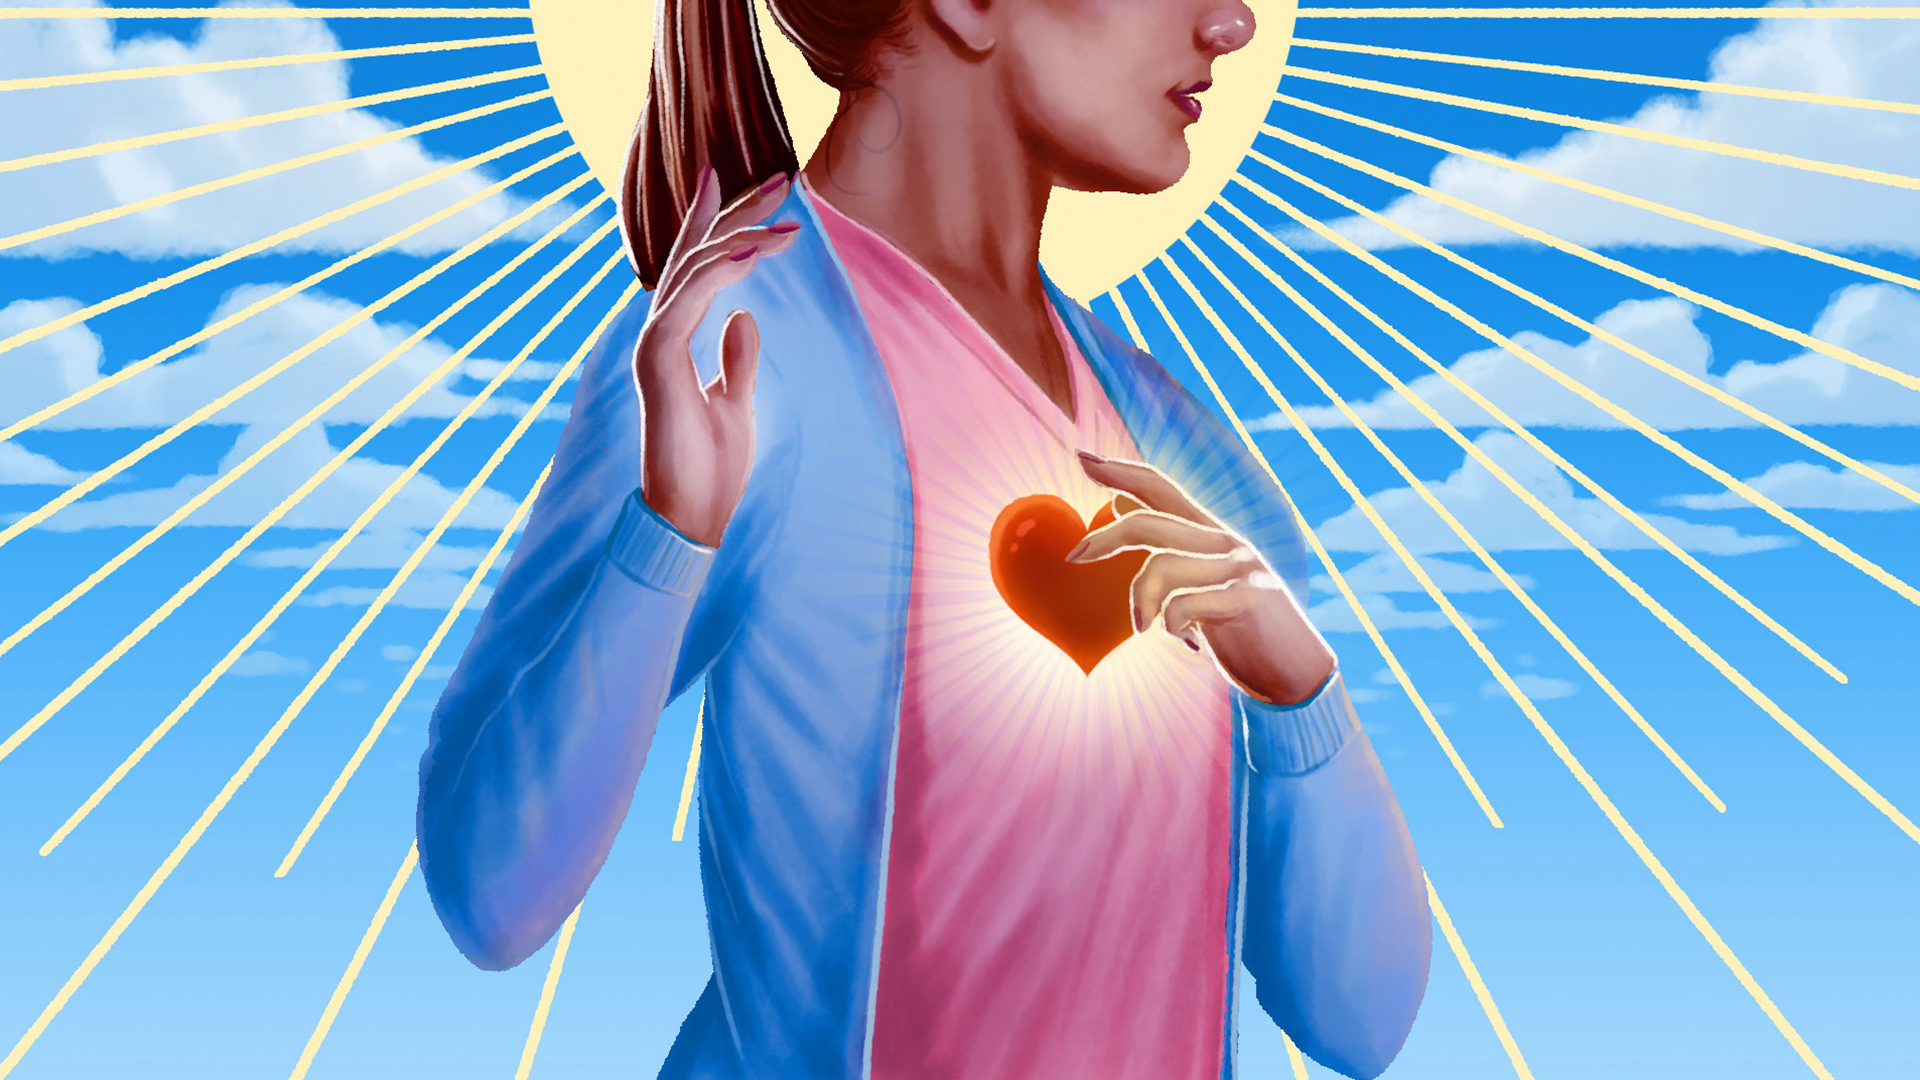 An illustration of a woman holding a hand to a radiant heart on her chest, reminicent of Catholic images of the Virgin Mary.